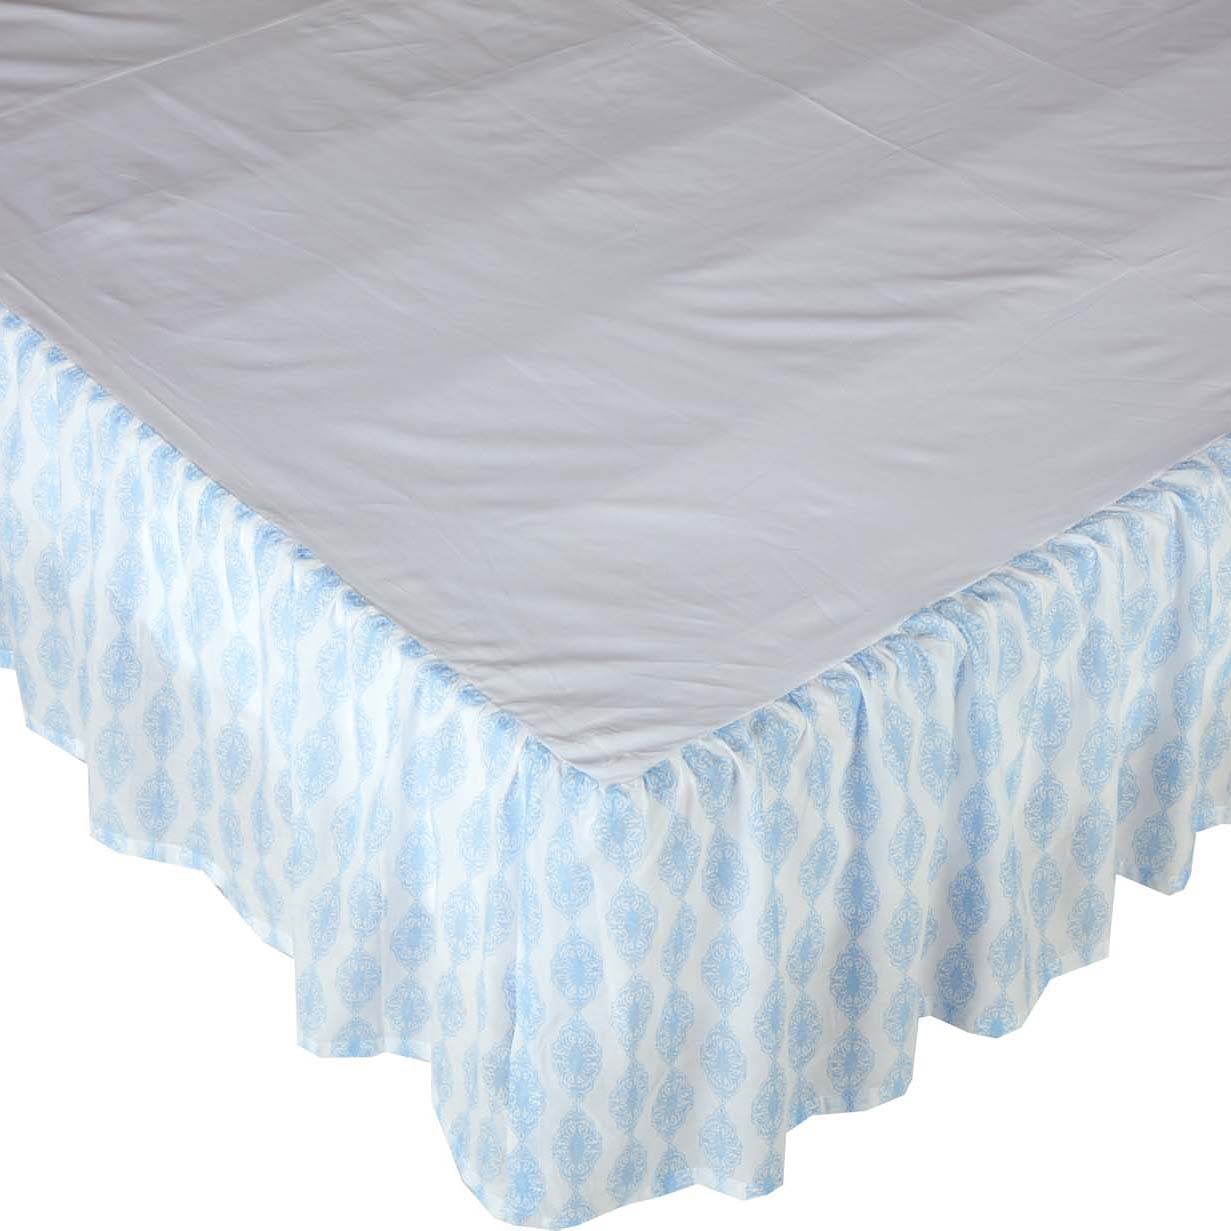 April & Olive Avani Blue Queen Bed Skirt 60x80x16 By VHC Brands